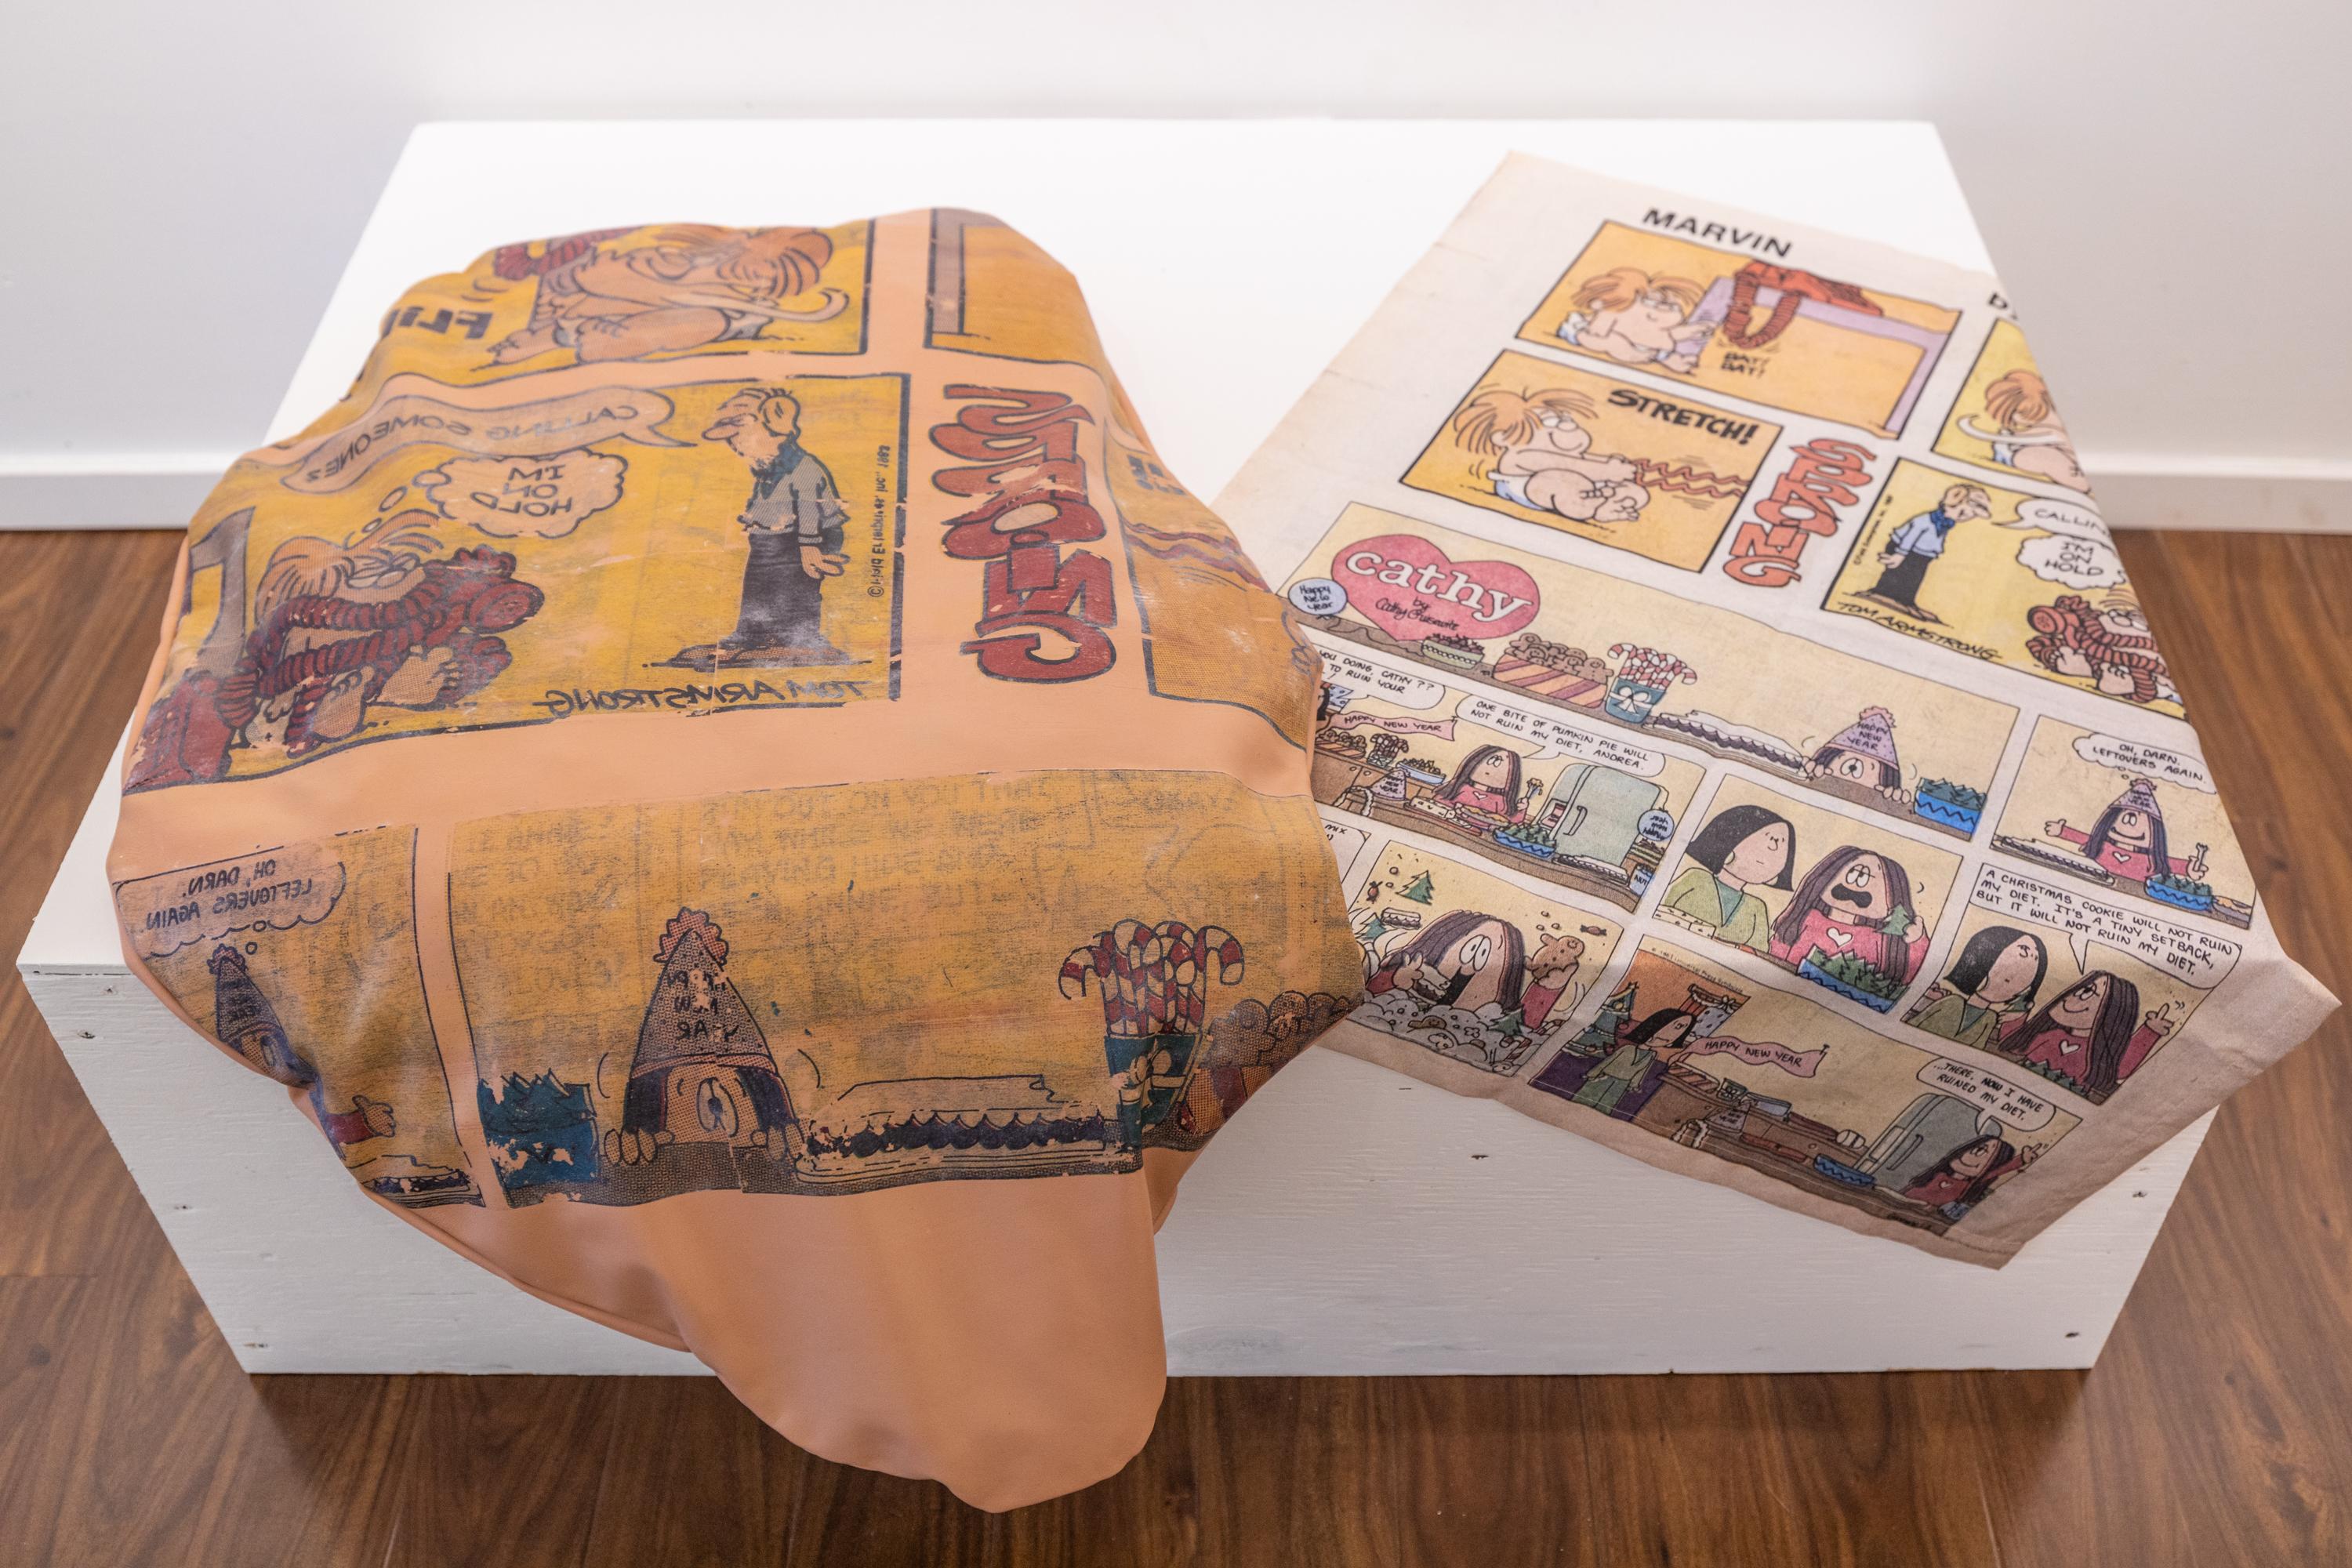 "Sunday Mornings" textile sculpture, oversized putty and comic strip - Mixed Media Art by Sarah Detweiler